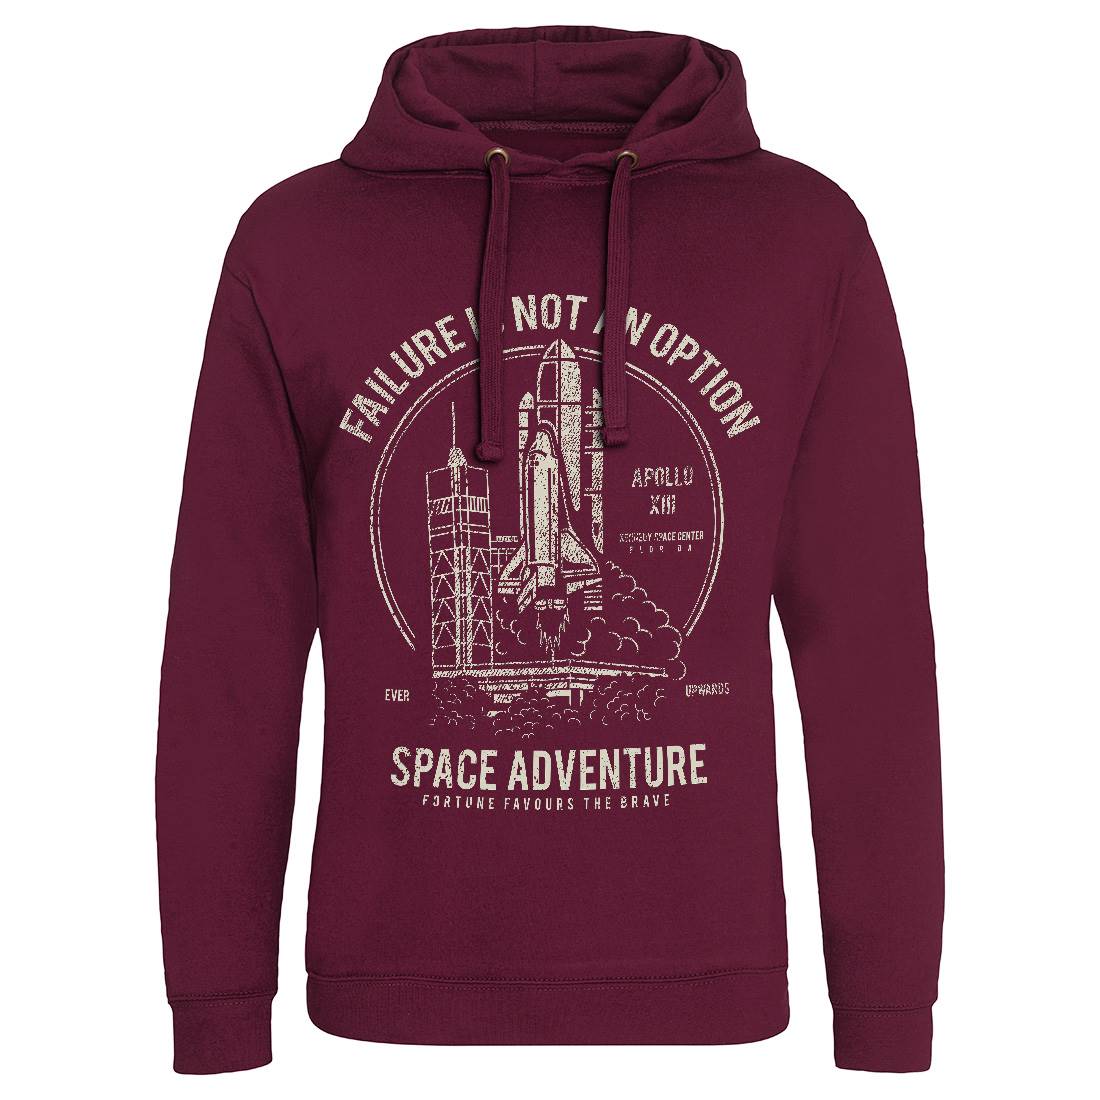 Adventure Mens Hoodie Without Pocket Space A149